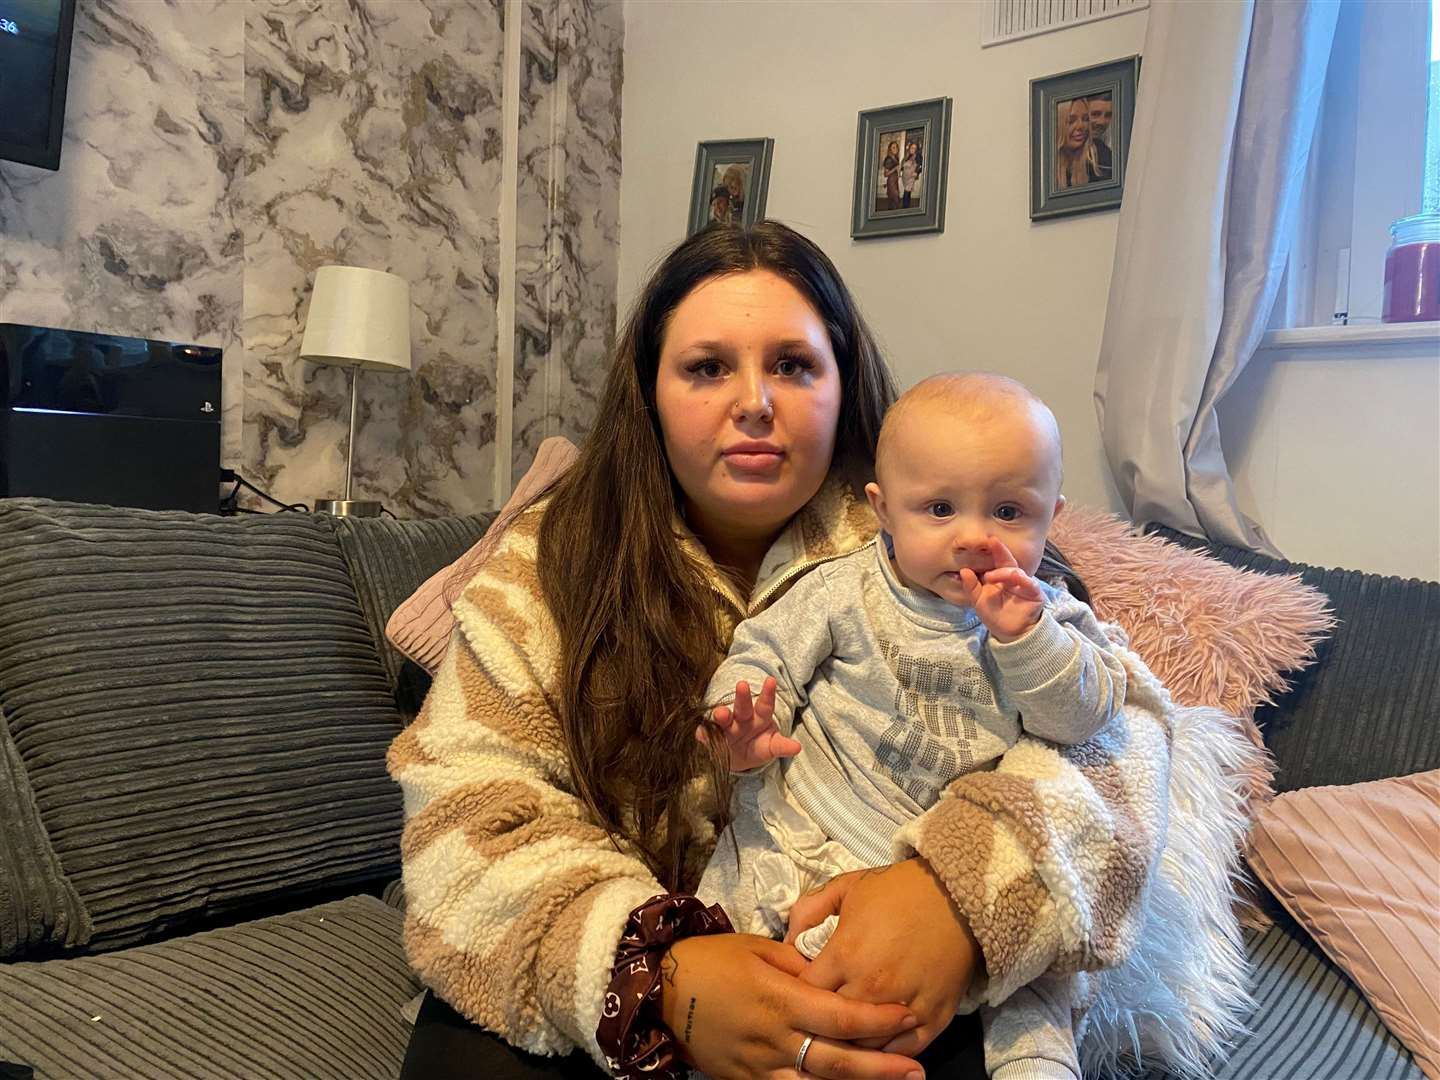 Courtney Fenton and her son Beau in their home at Elizabeth Court in Herne Bay